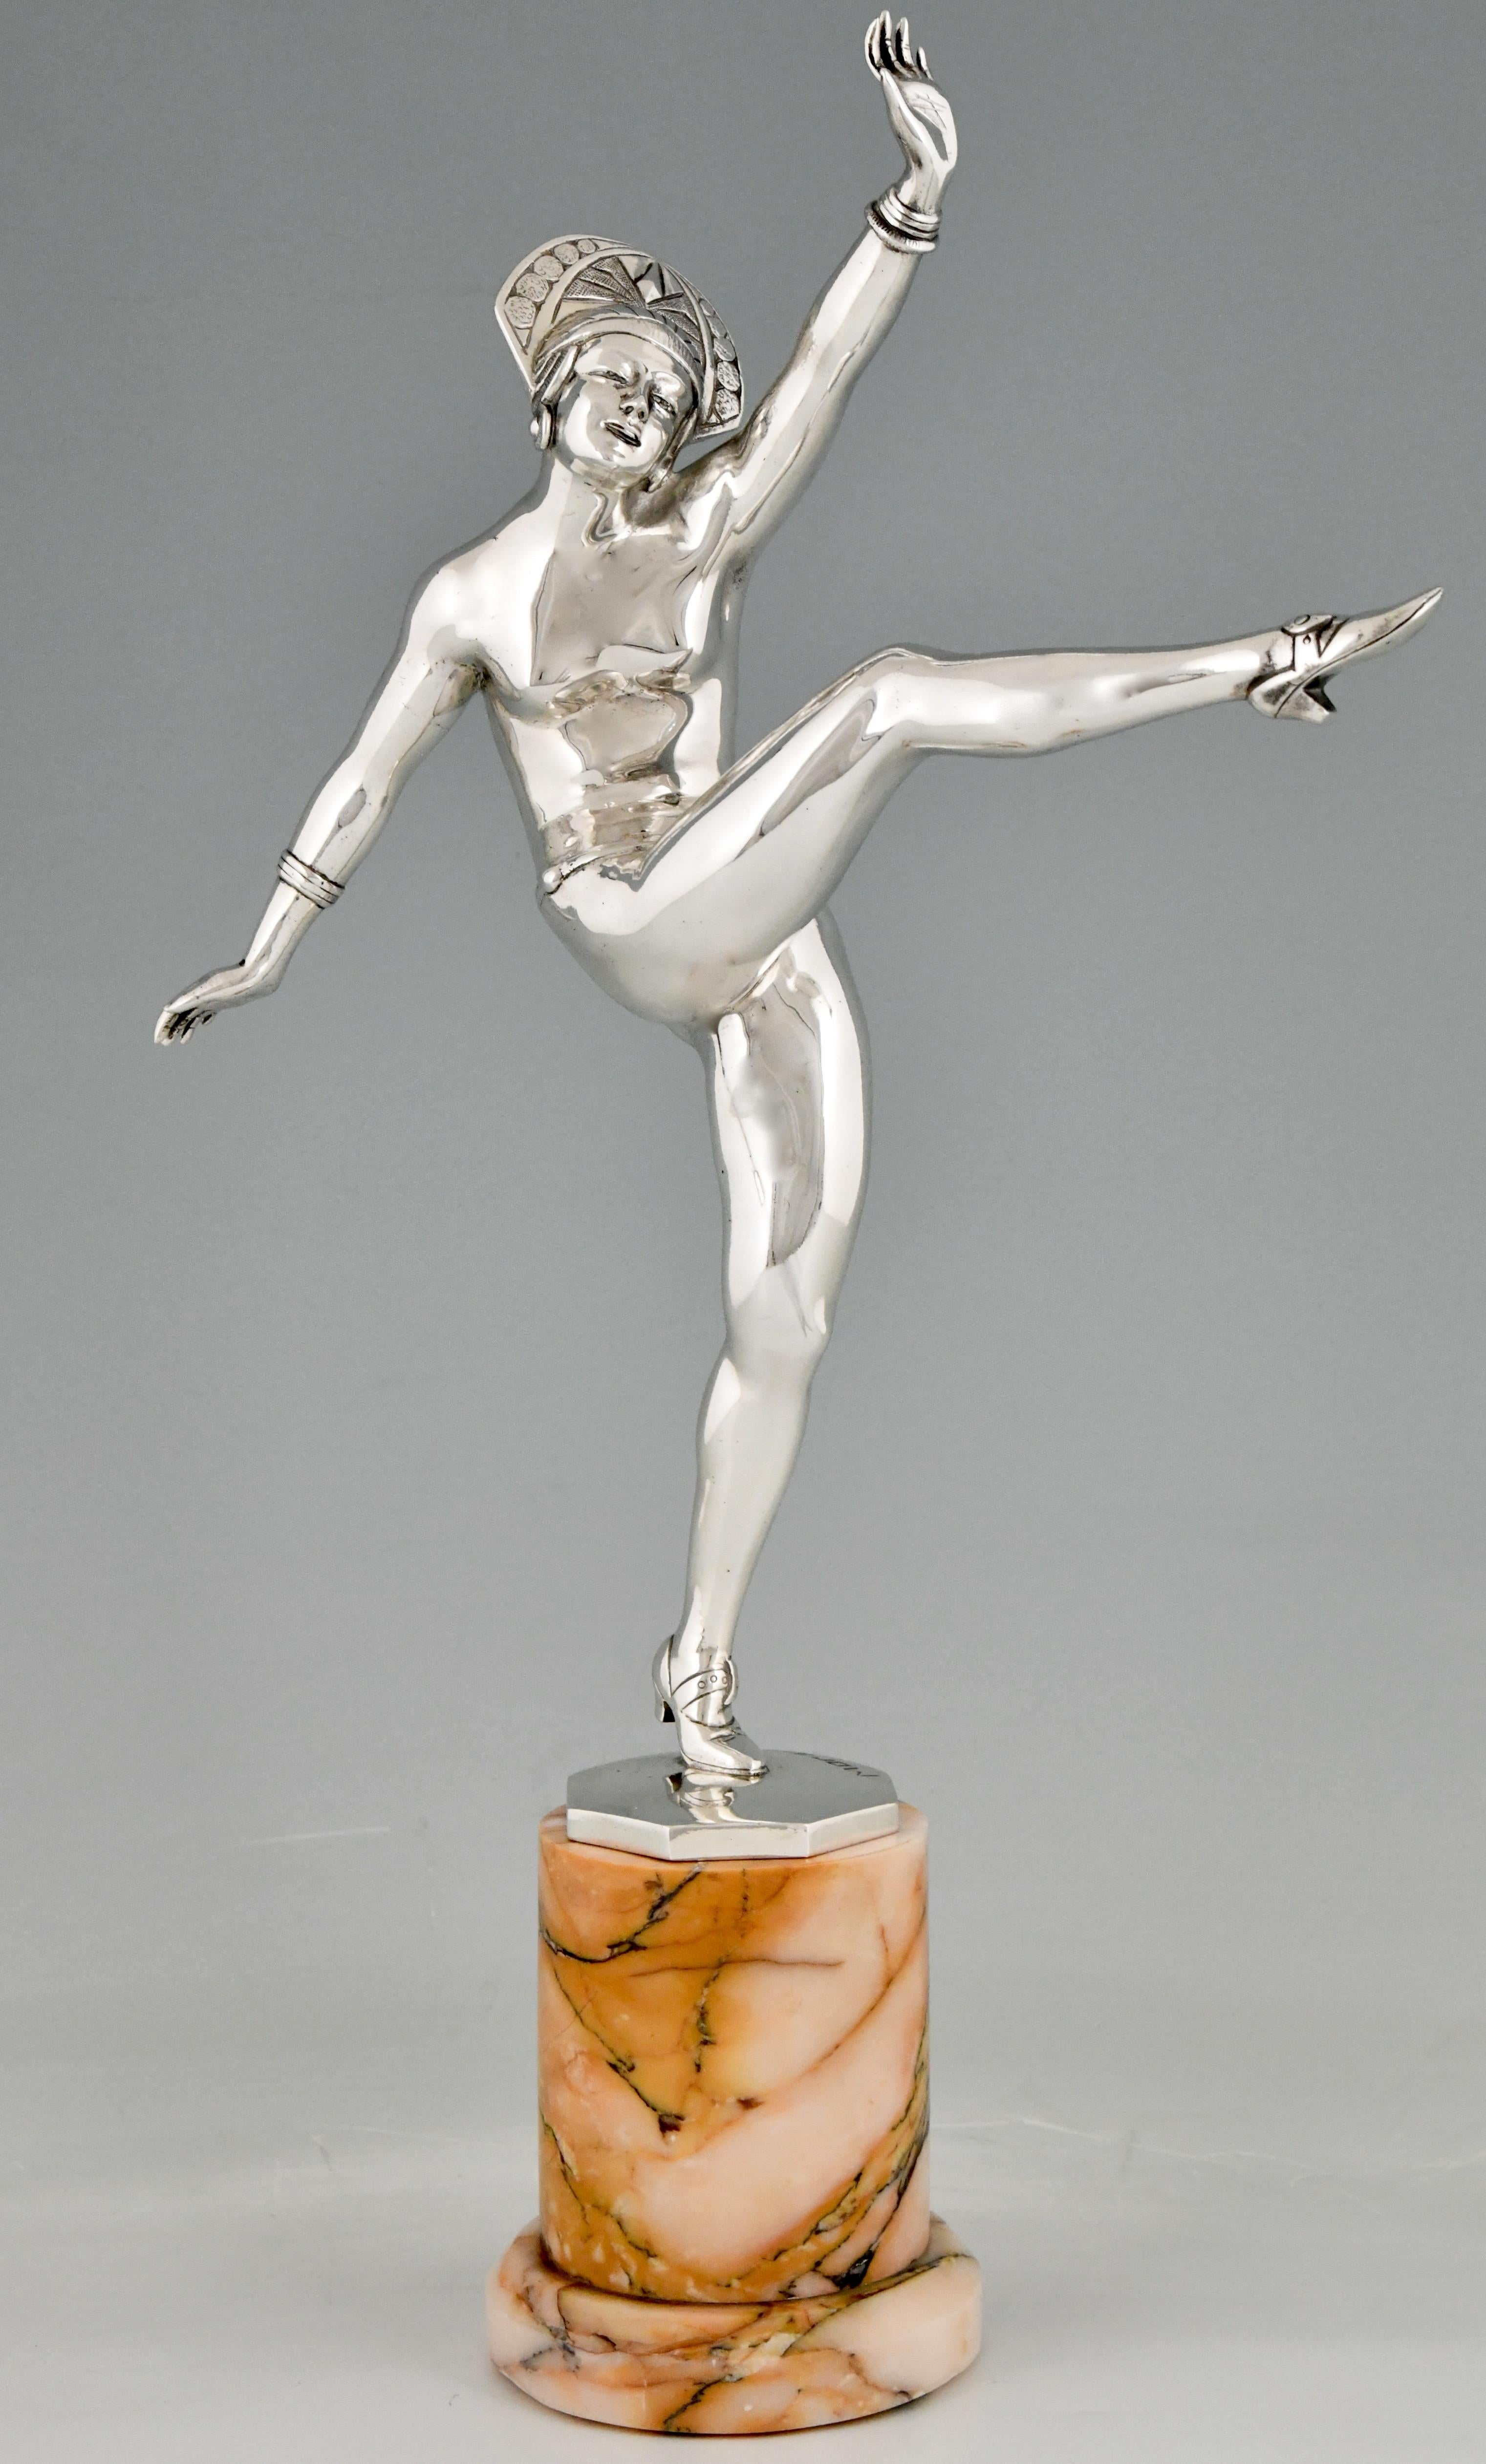 Art Deco silvered bronze sculpture nude dancer. High Kicker by J. P. Morante. Silvered bronze on a circular marble base. France 1925.

This model is illustrated in: Bronzes, sculptors and founders by H. Berman, Abage. Art deco and other figures by